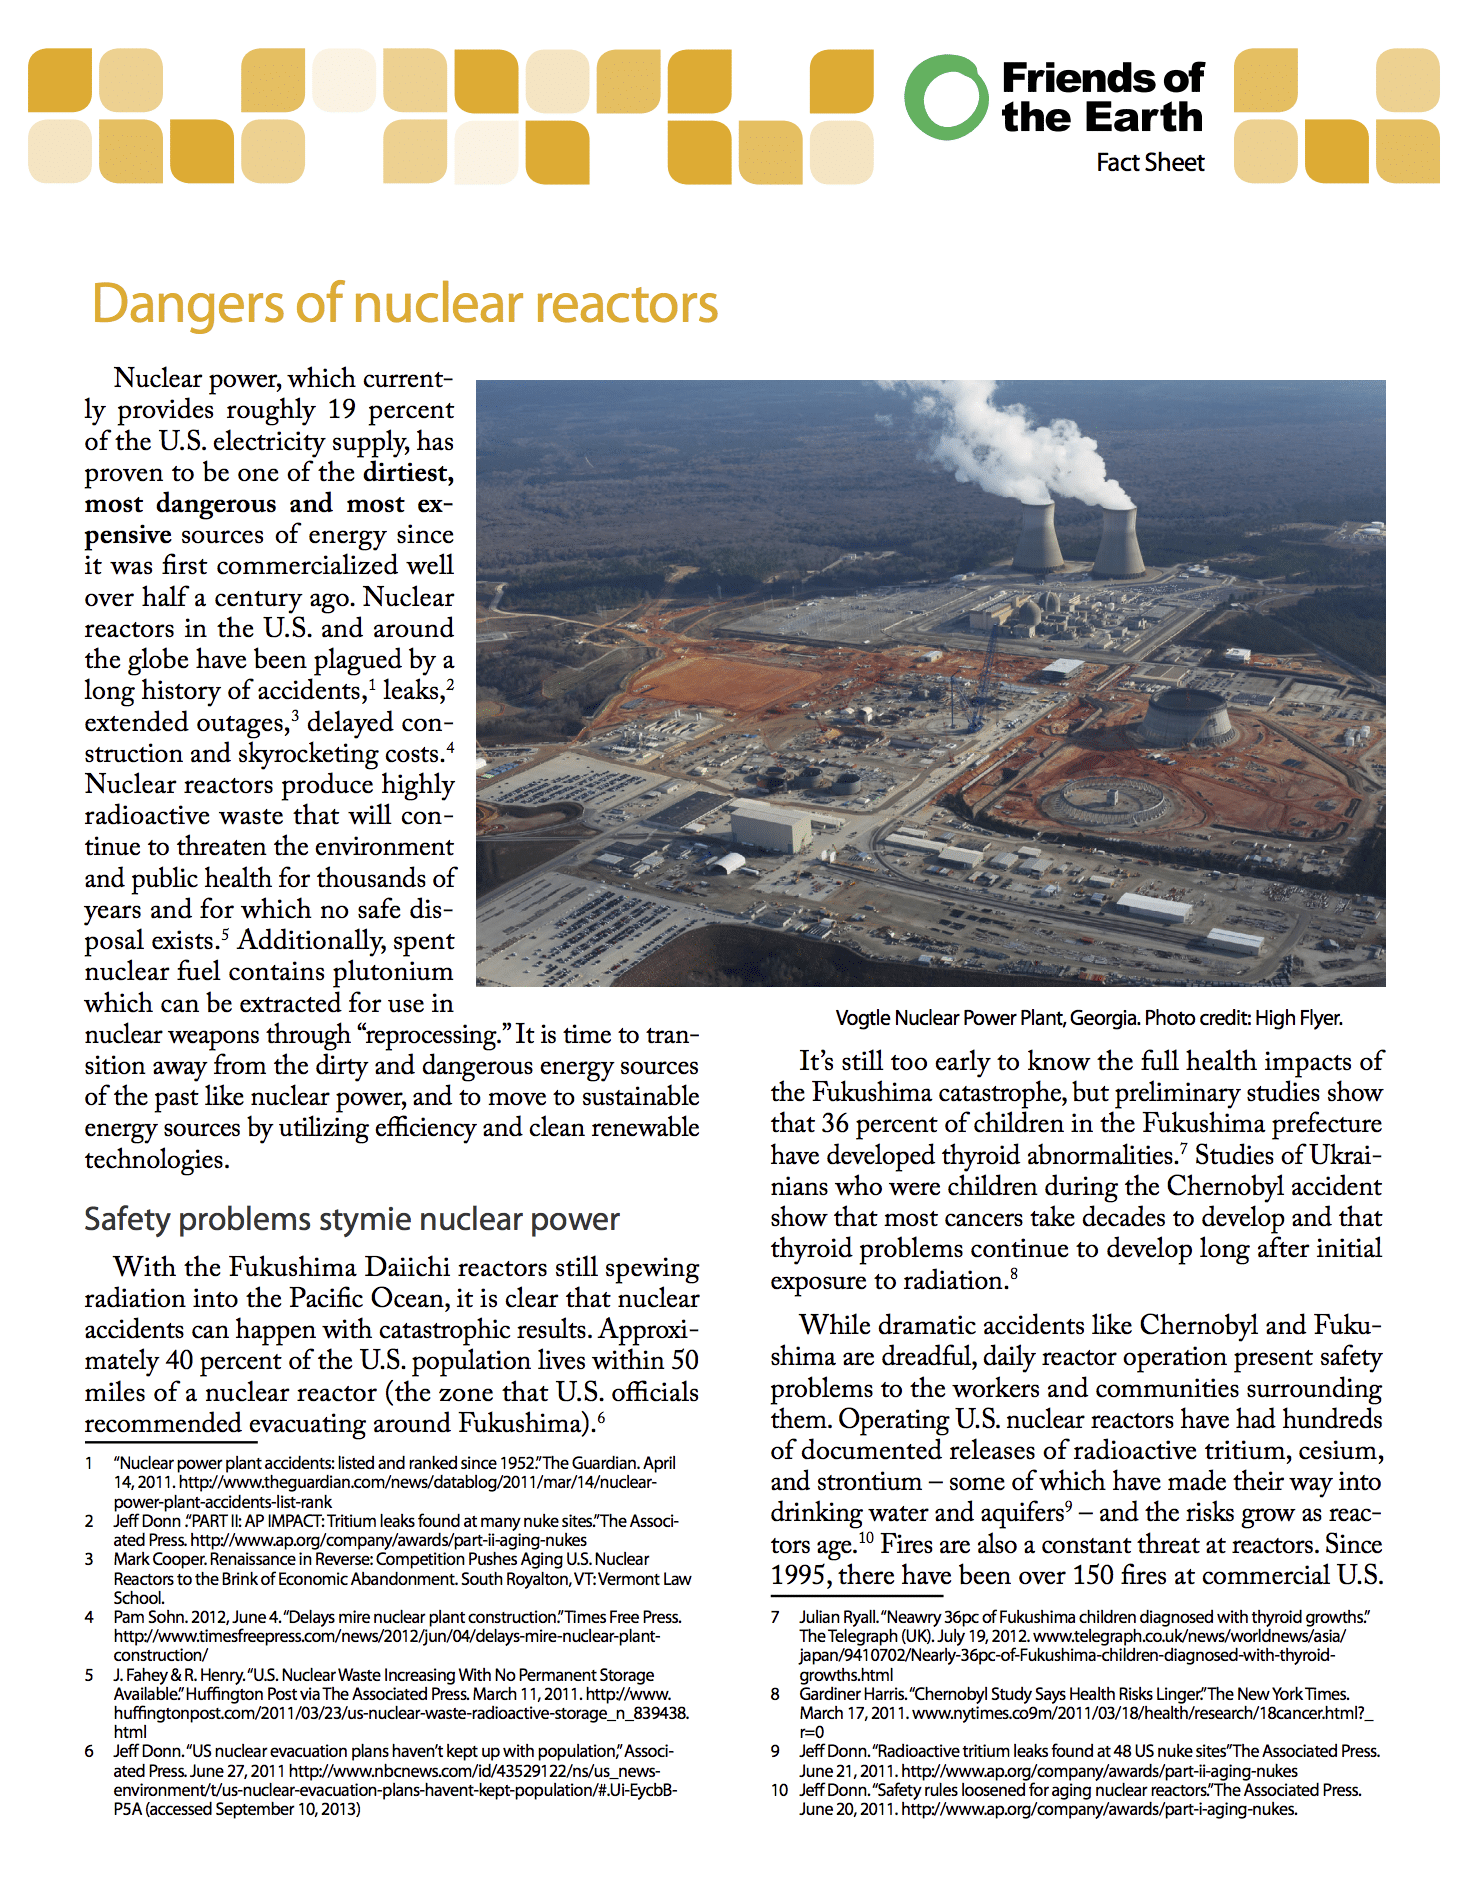 The Dangers of Nuclear Reactors